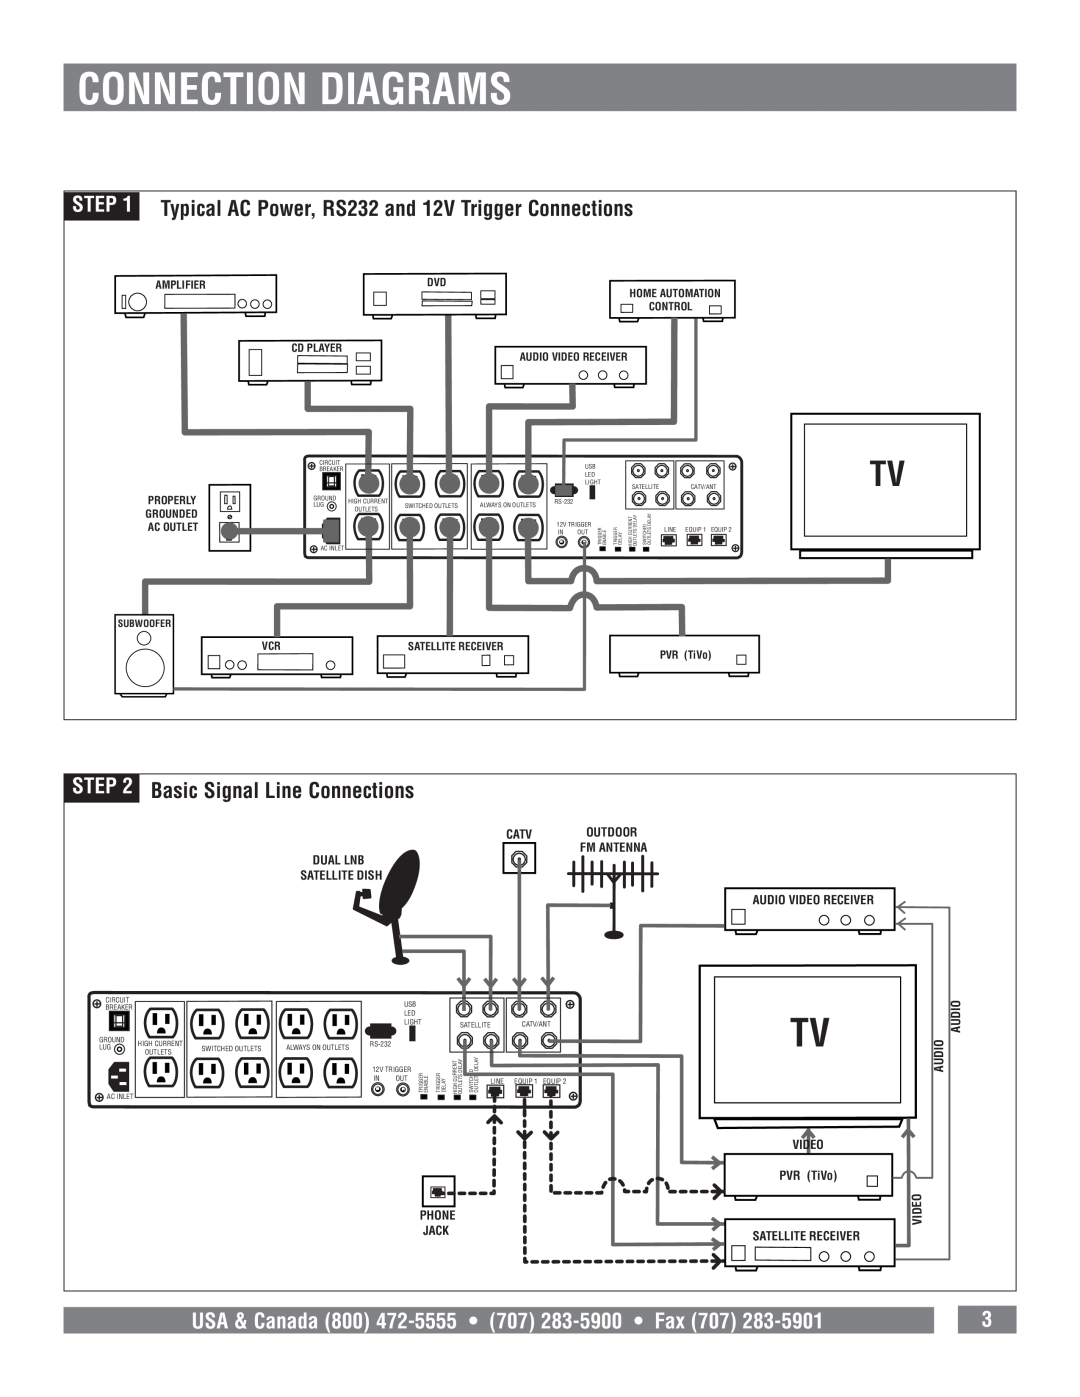 Panamax MAX 5410 Connection Diagrams, Typical AC Power, RS232 and 12V Trigger Connections, Basic Signal Line Connections 